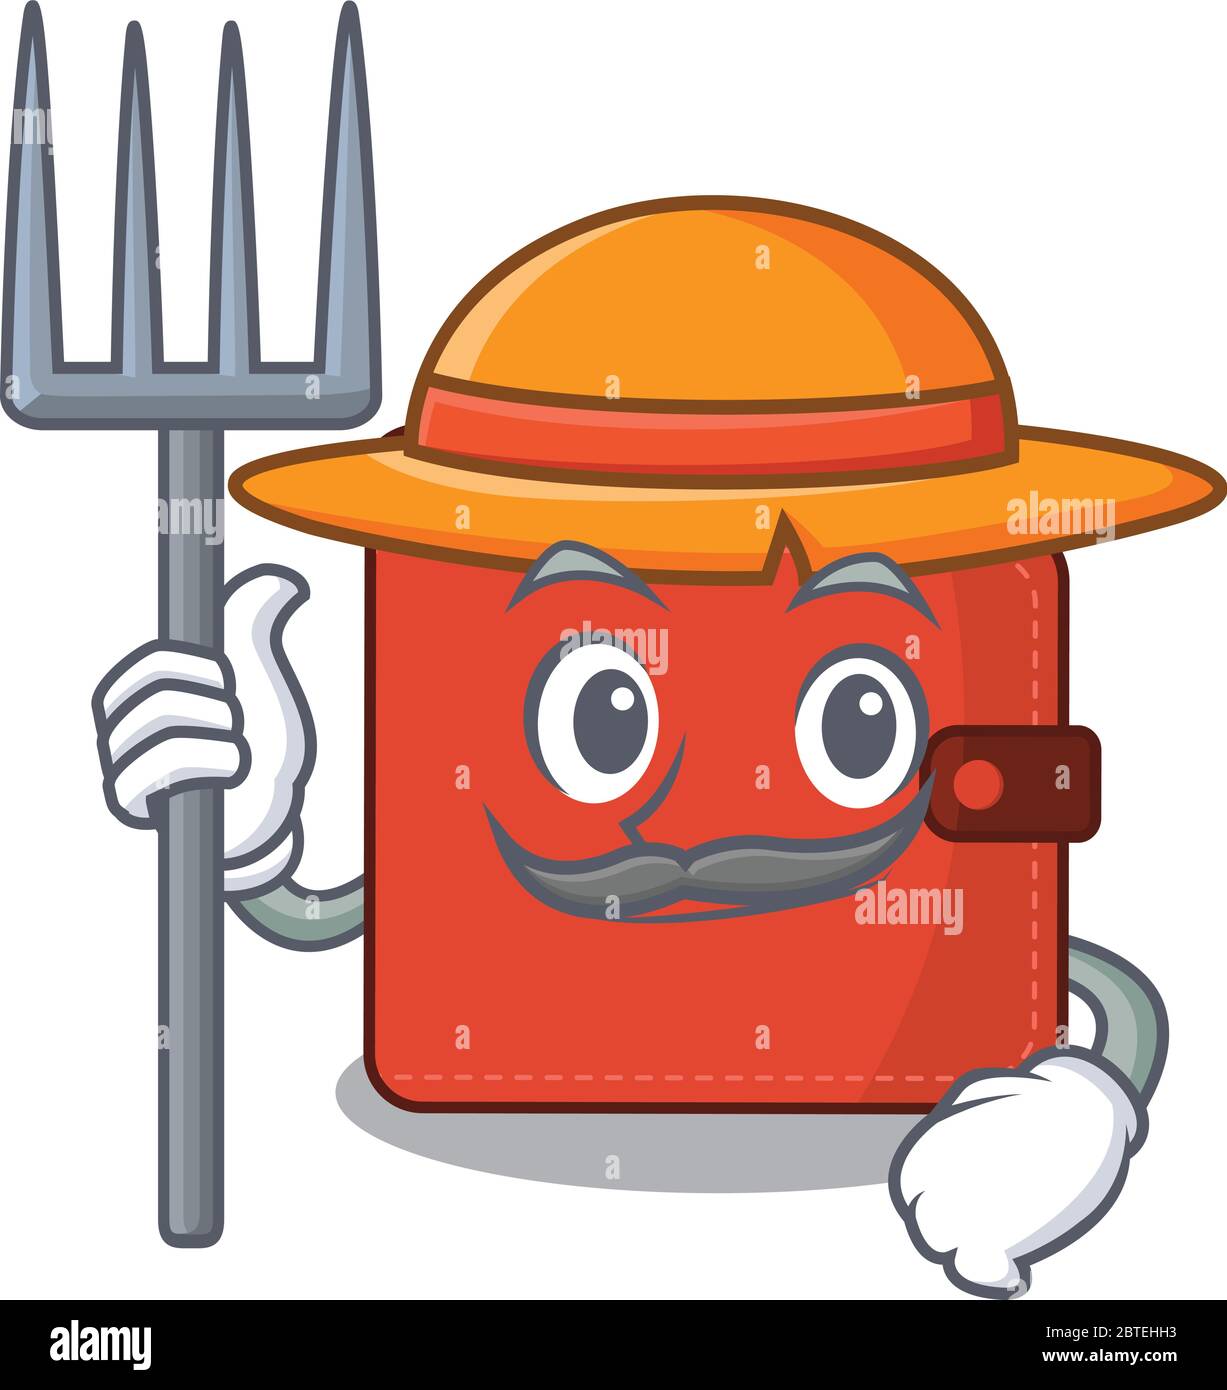 Card wallet mascot design working as a Farmer wearing a hat. Vector illustration Stock Vector